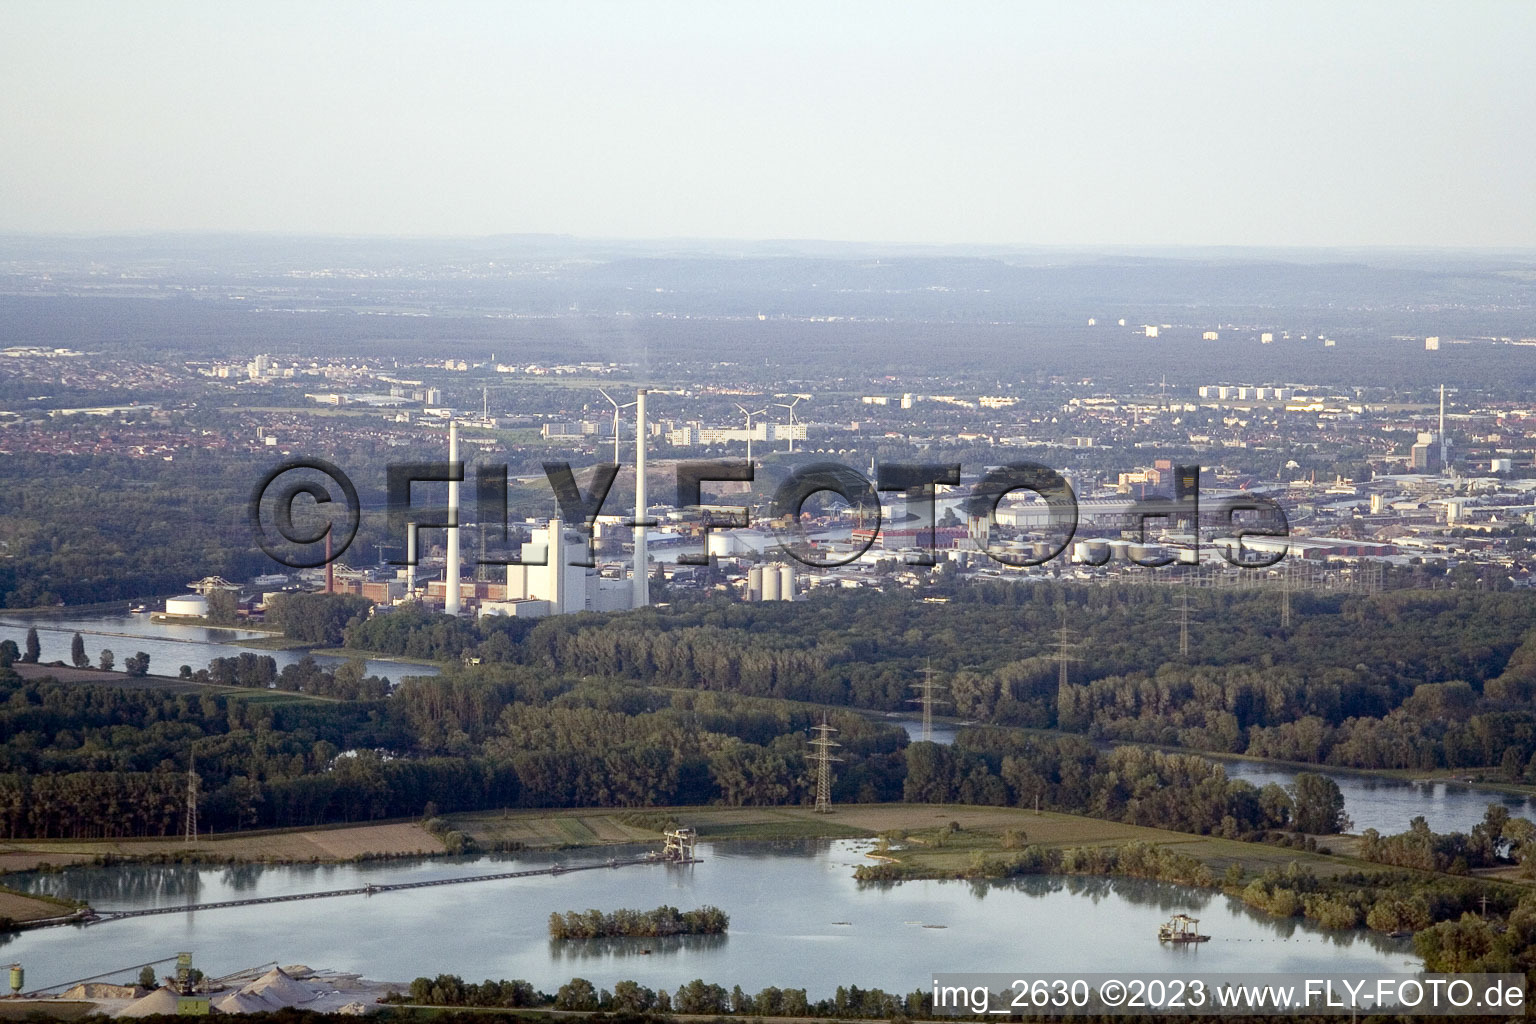 From the southwest in the district Rheinhafen in Karlsruhe in the state Baden-Wuerttemberg, Germany